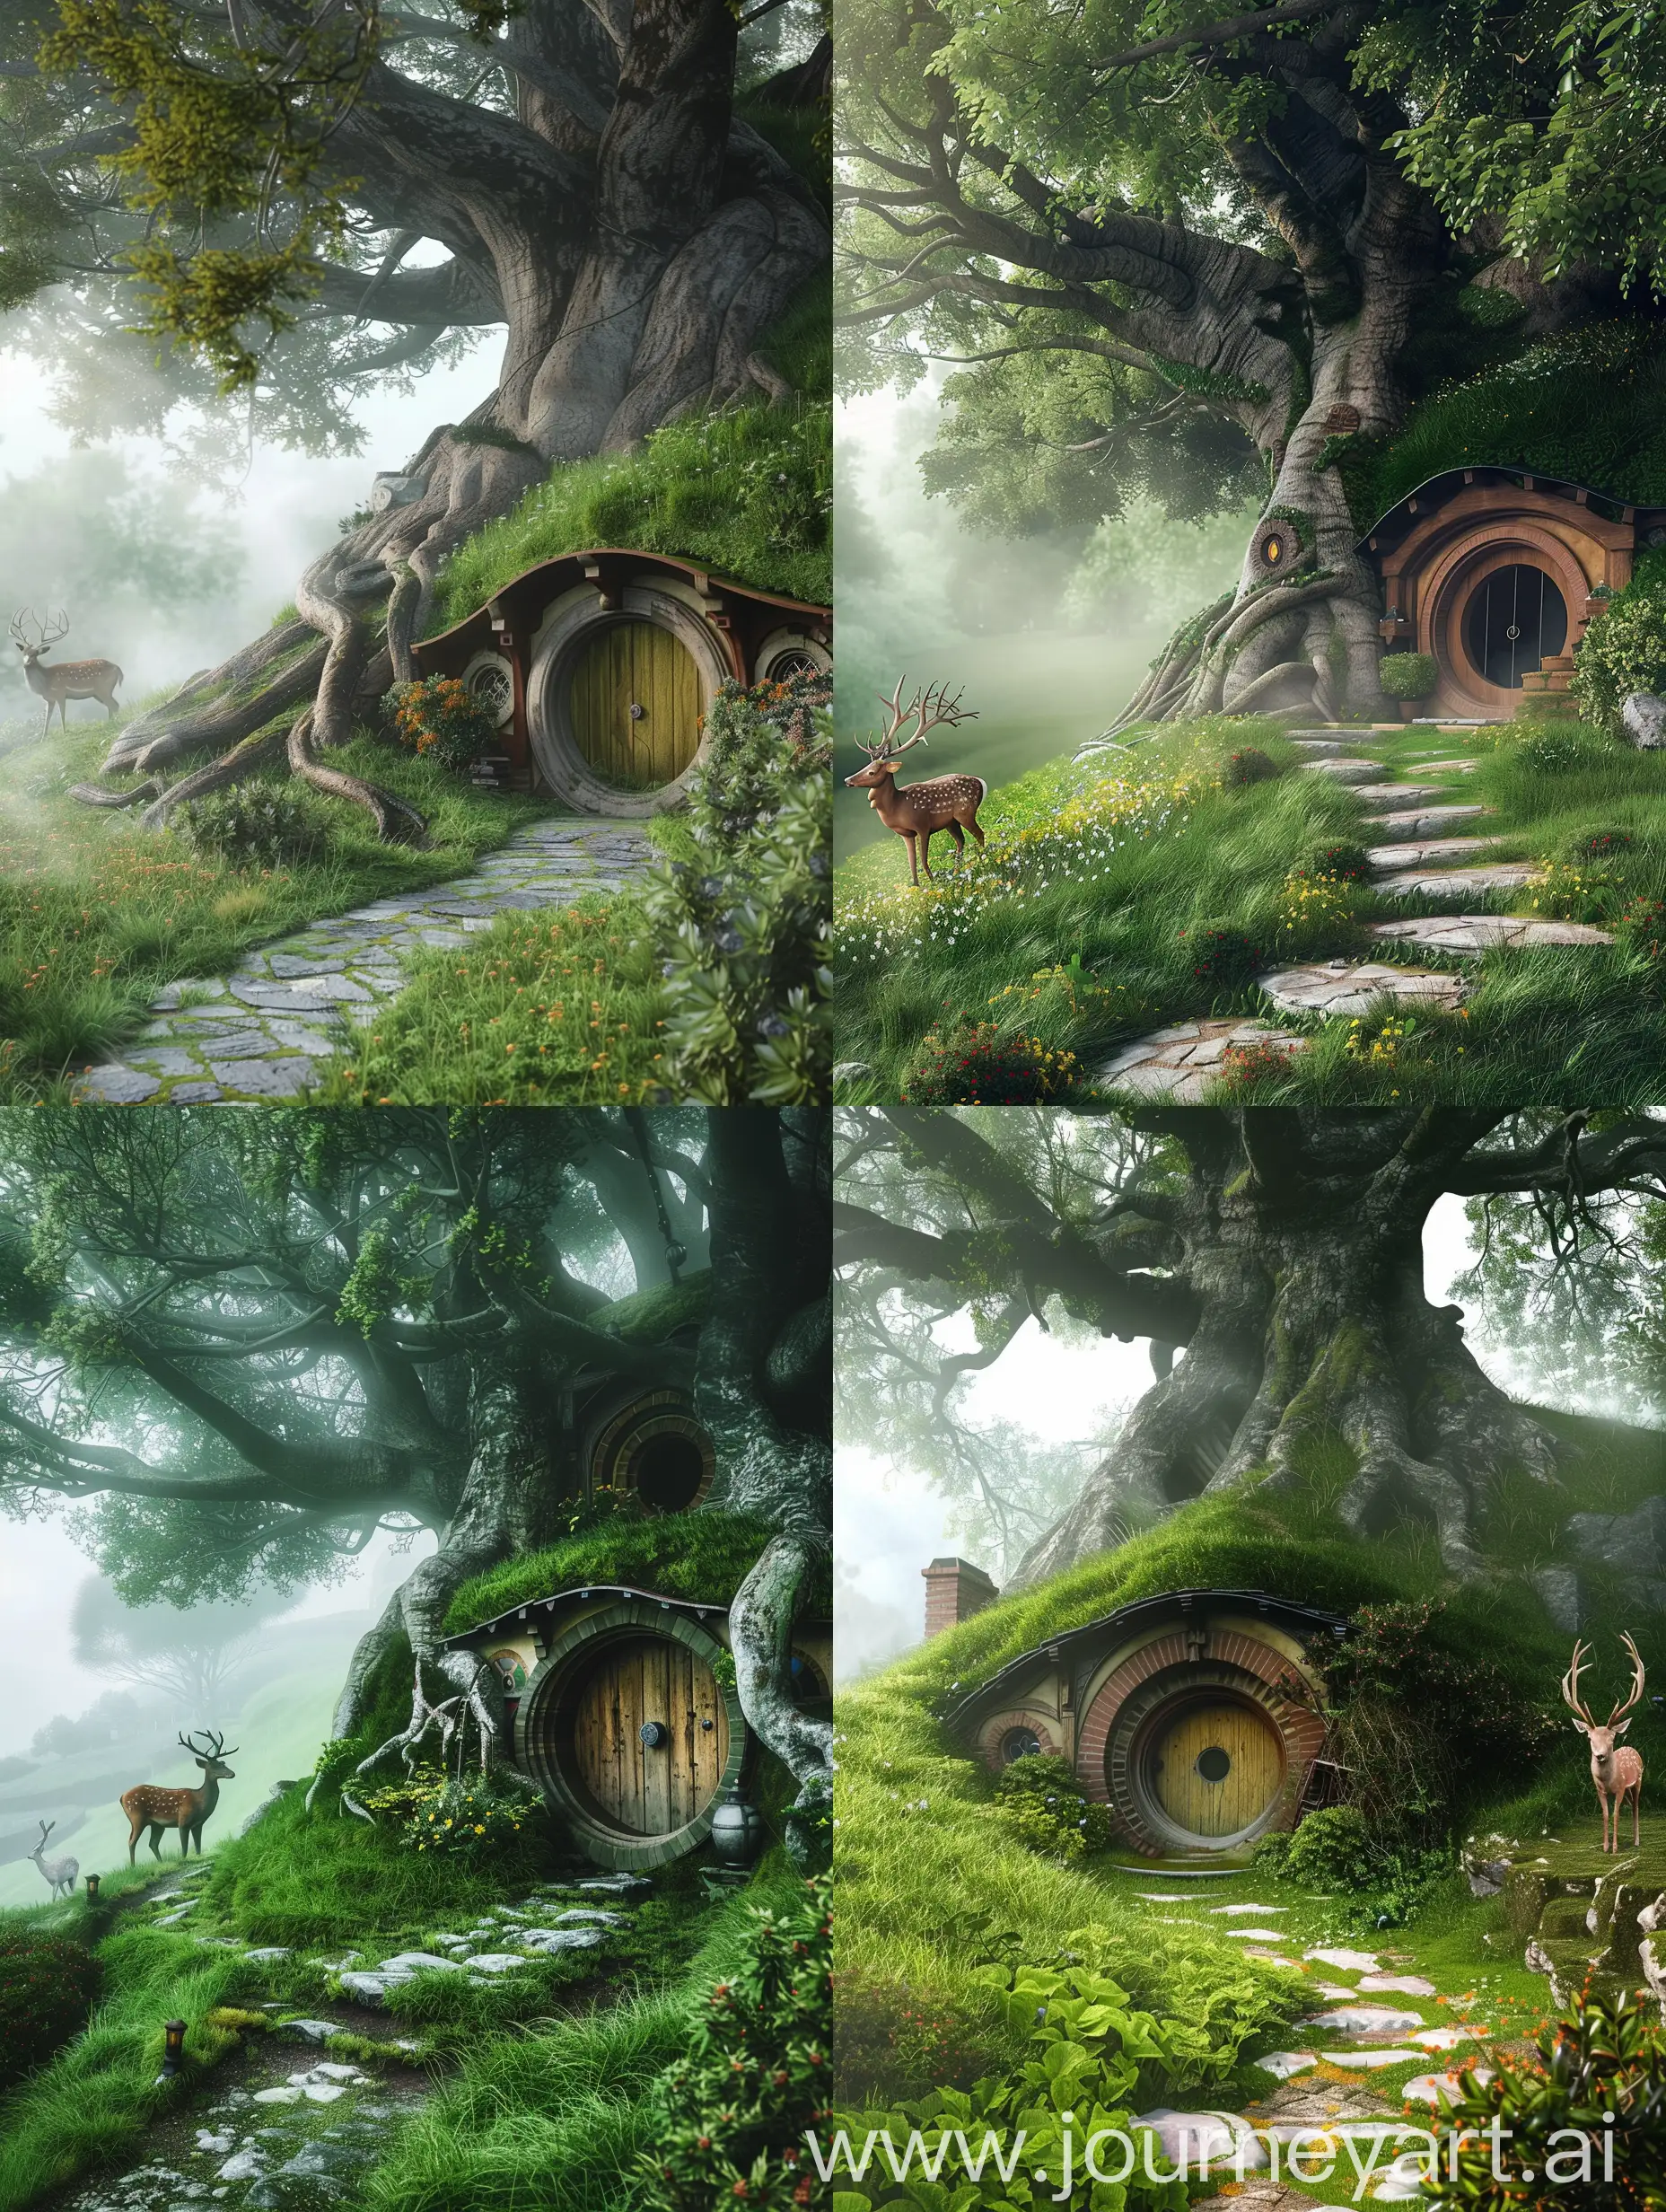 Enchanting-Hobbitstyle-House-Amidst-Lush-Garden-and-Misty-Atmosphere